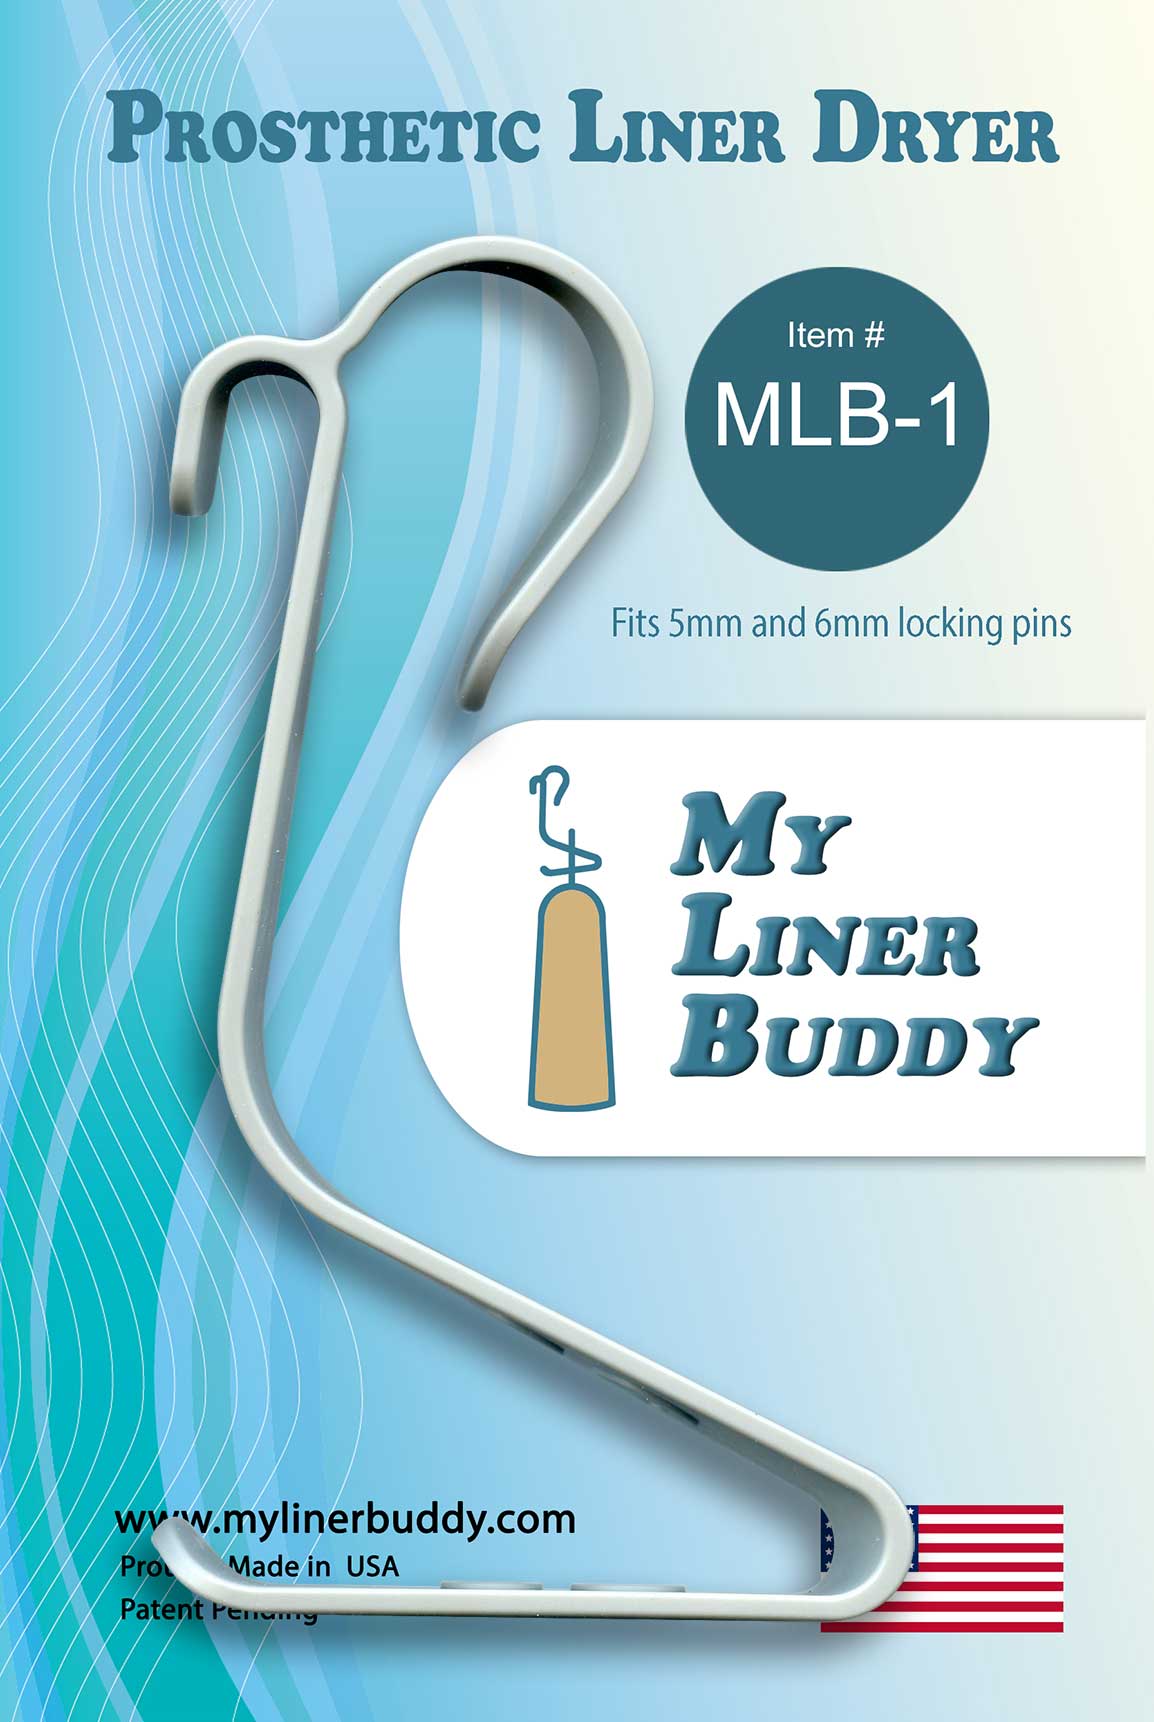 MLB-1, My Liner Buddy Prosthetic Locking Liner Dryer Hook (Fits 5mm and 6mm Locking Pins) (See pictured examples of locking pins for the MLB-1)